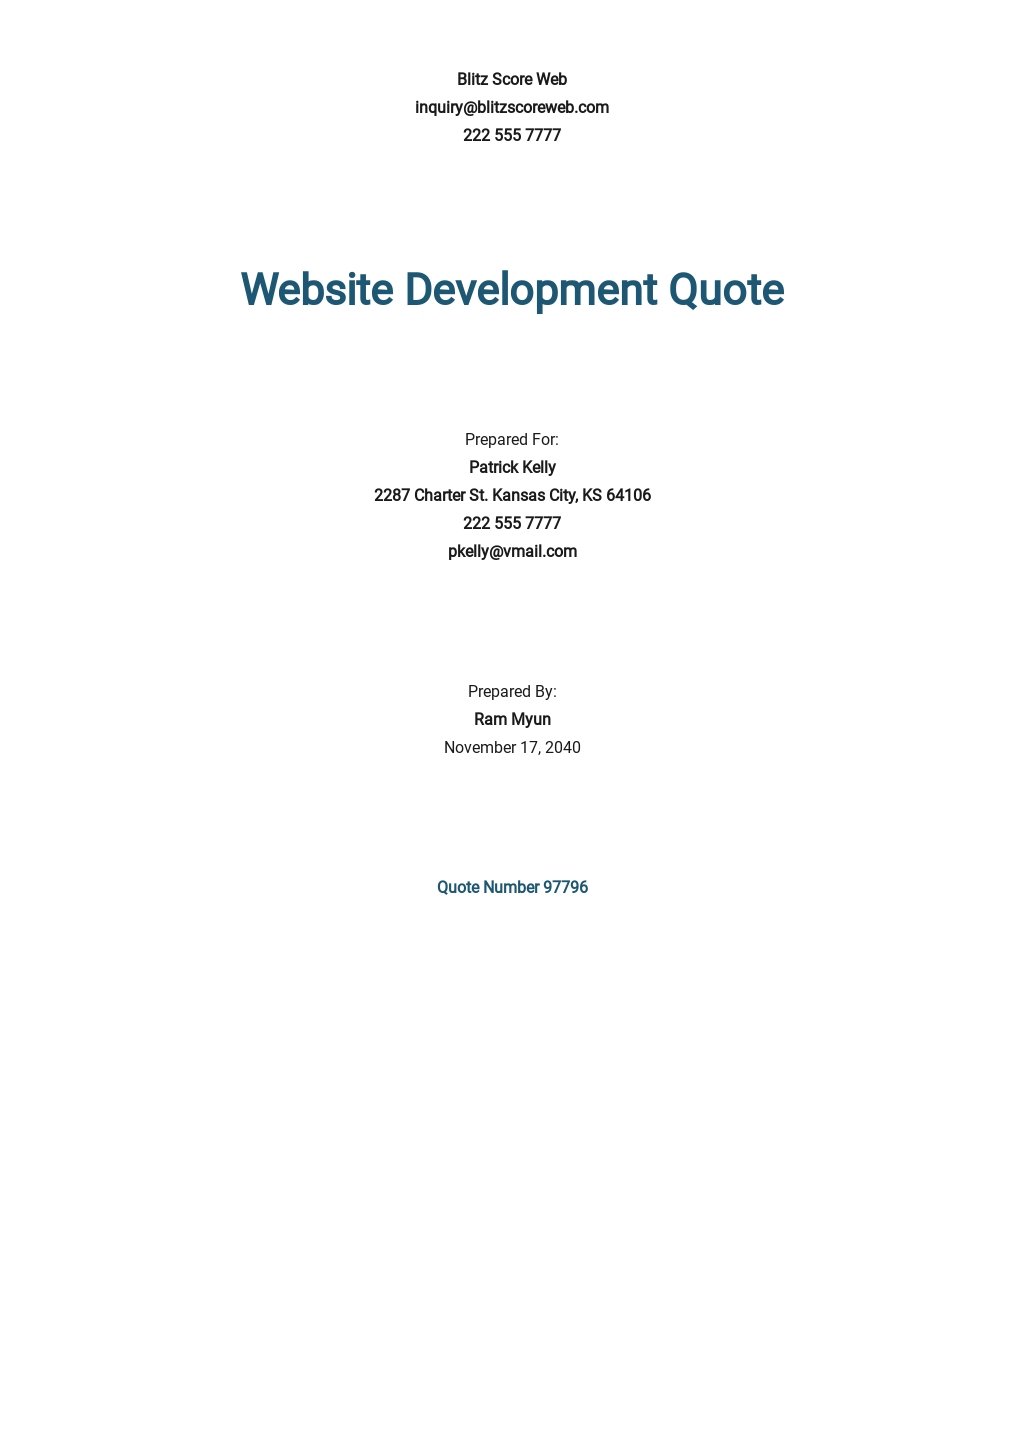 Ecommerce Website Quotation Template in Google Docs Google Sheets